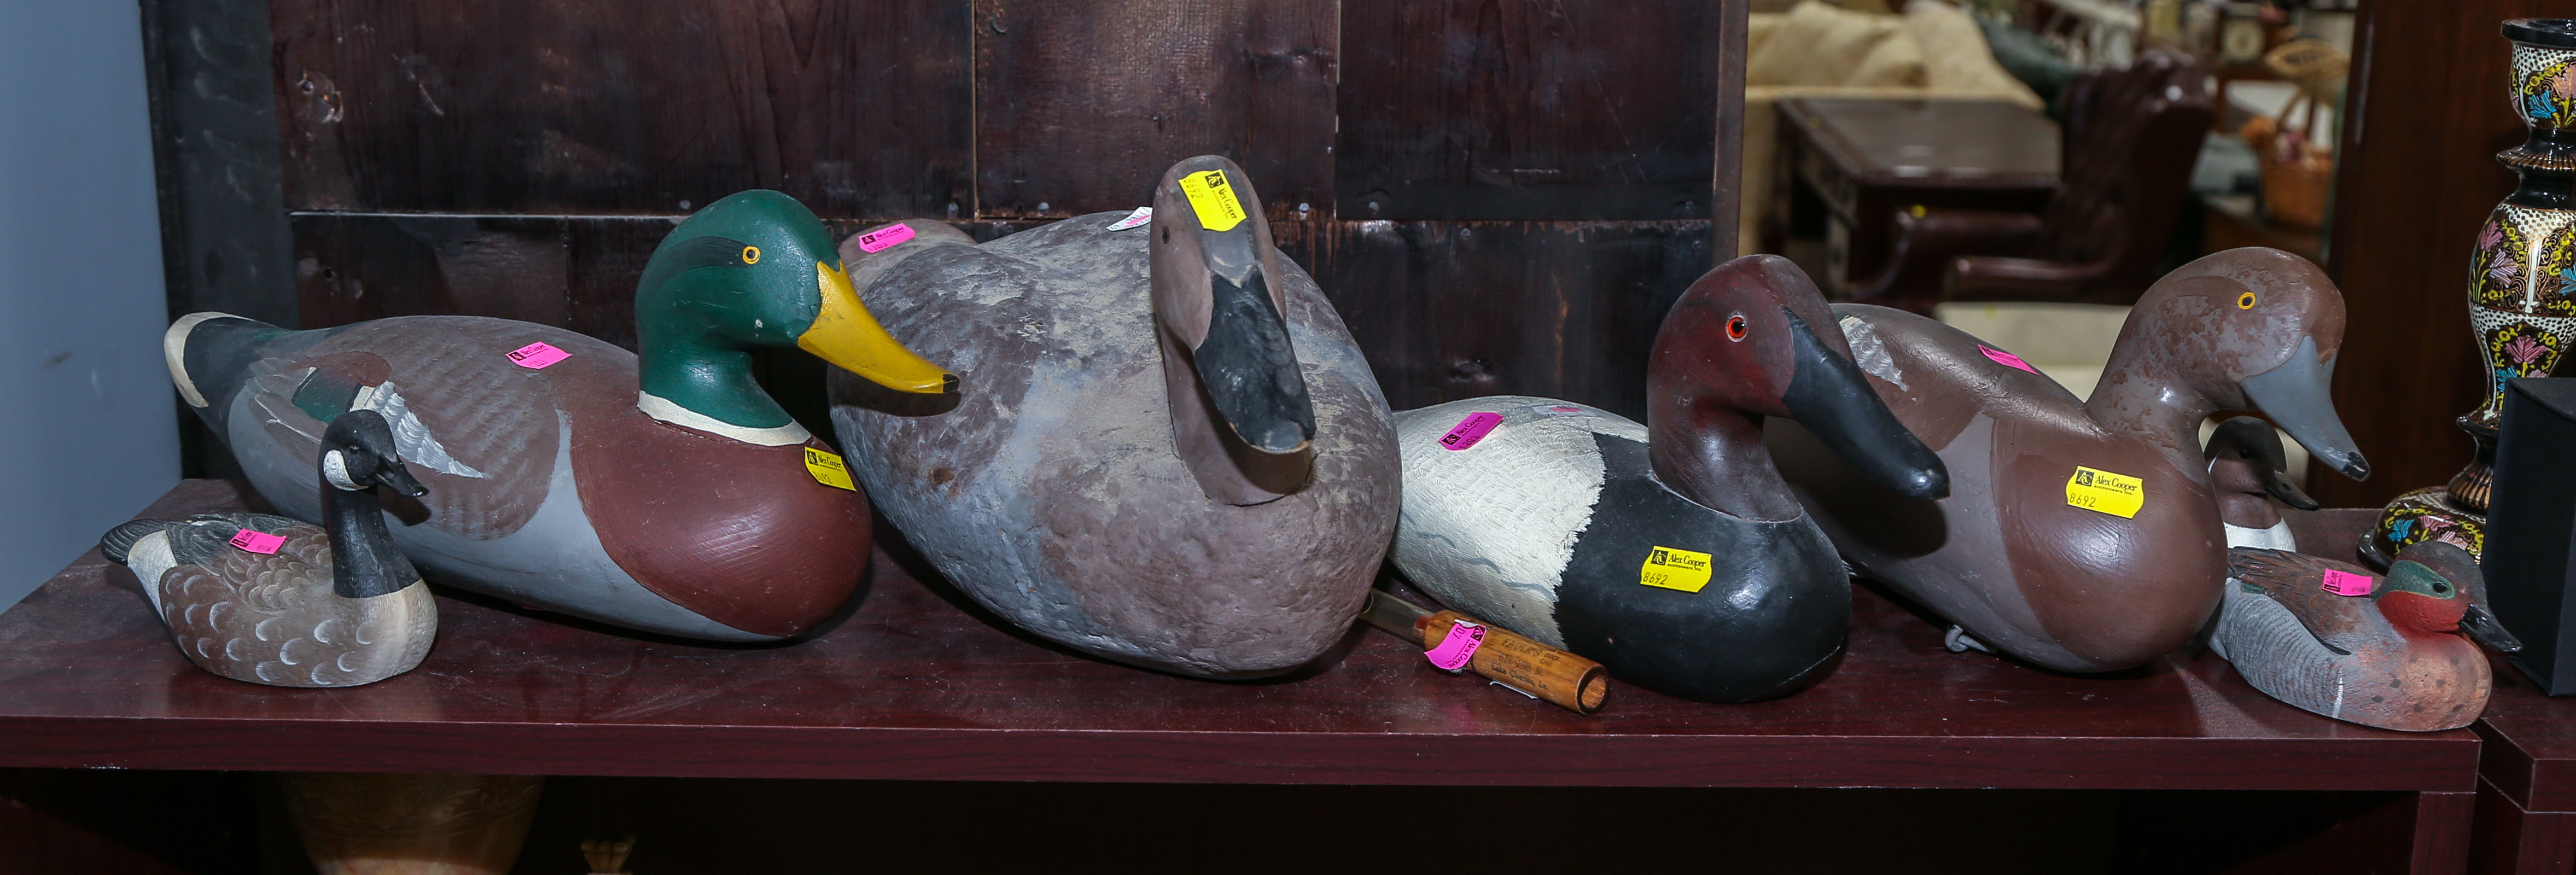 MADISON MITCHELL OTHER DUCK DECOYS 3cb422